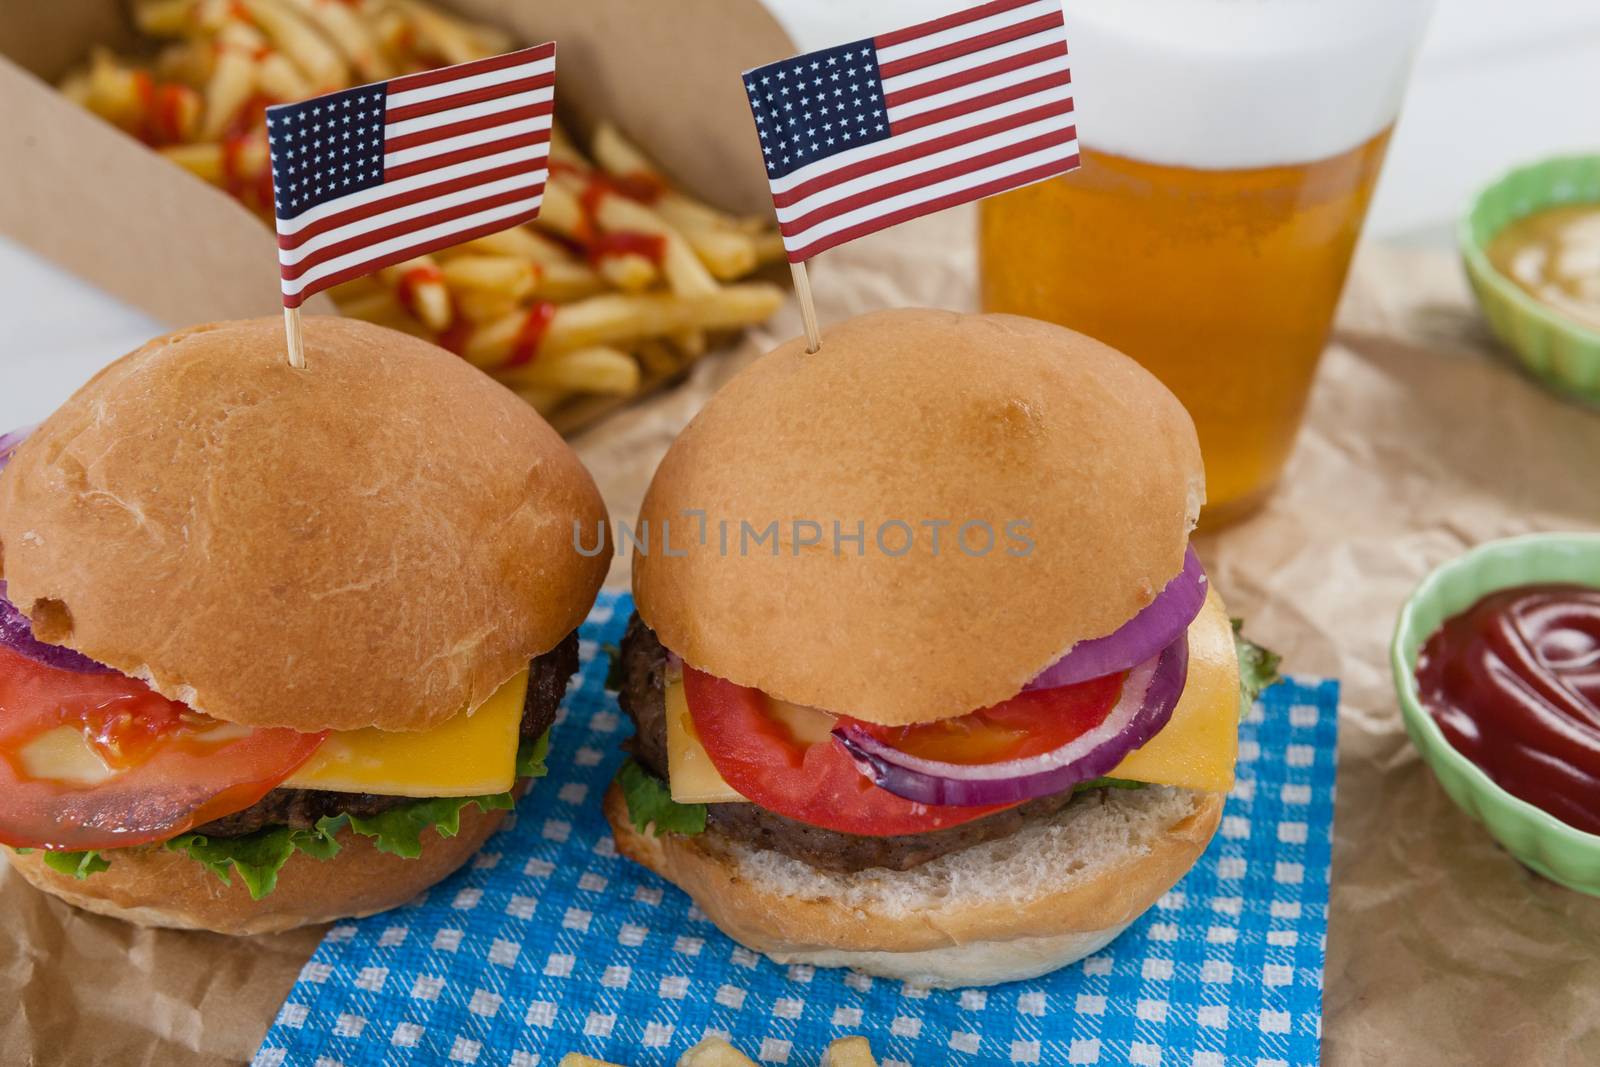 Hamburgers decorated with 4th july theme by Wavebreakmedia